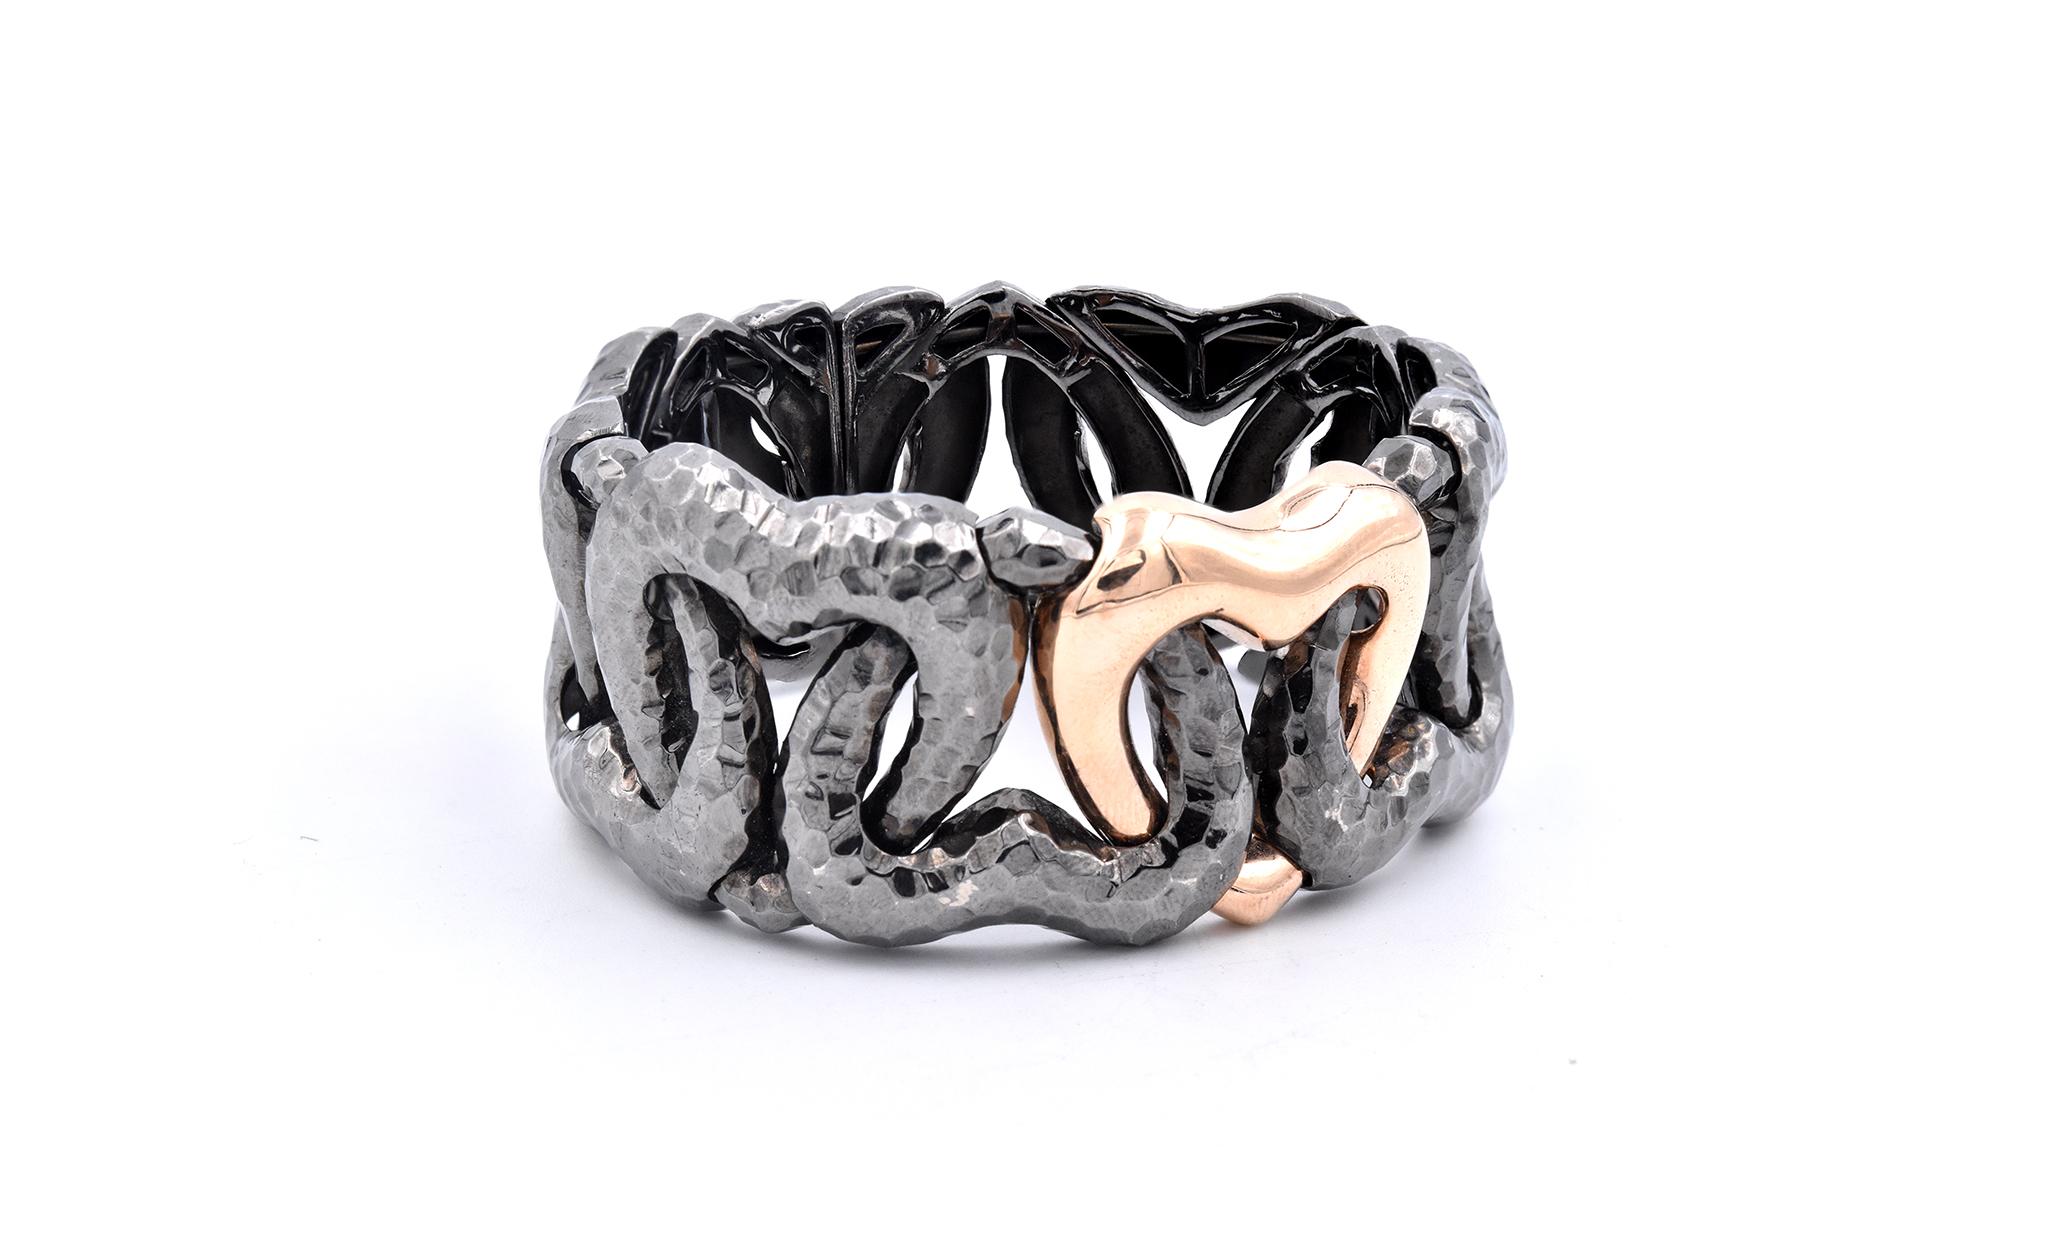 Designer: custom 
Material: 18k rose gold and sterling silver
Dimensions: the bracelet will fit up to a 6.5-8-inch wrist, bracelet measures 28.5mm wide
Weight: 68.18 grams